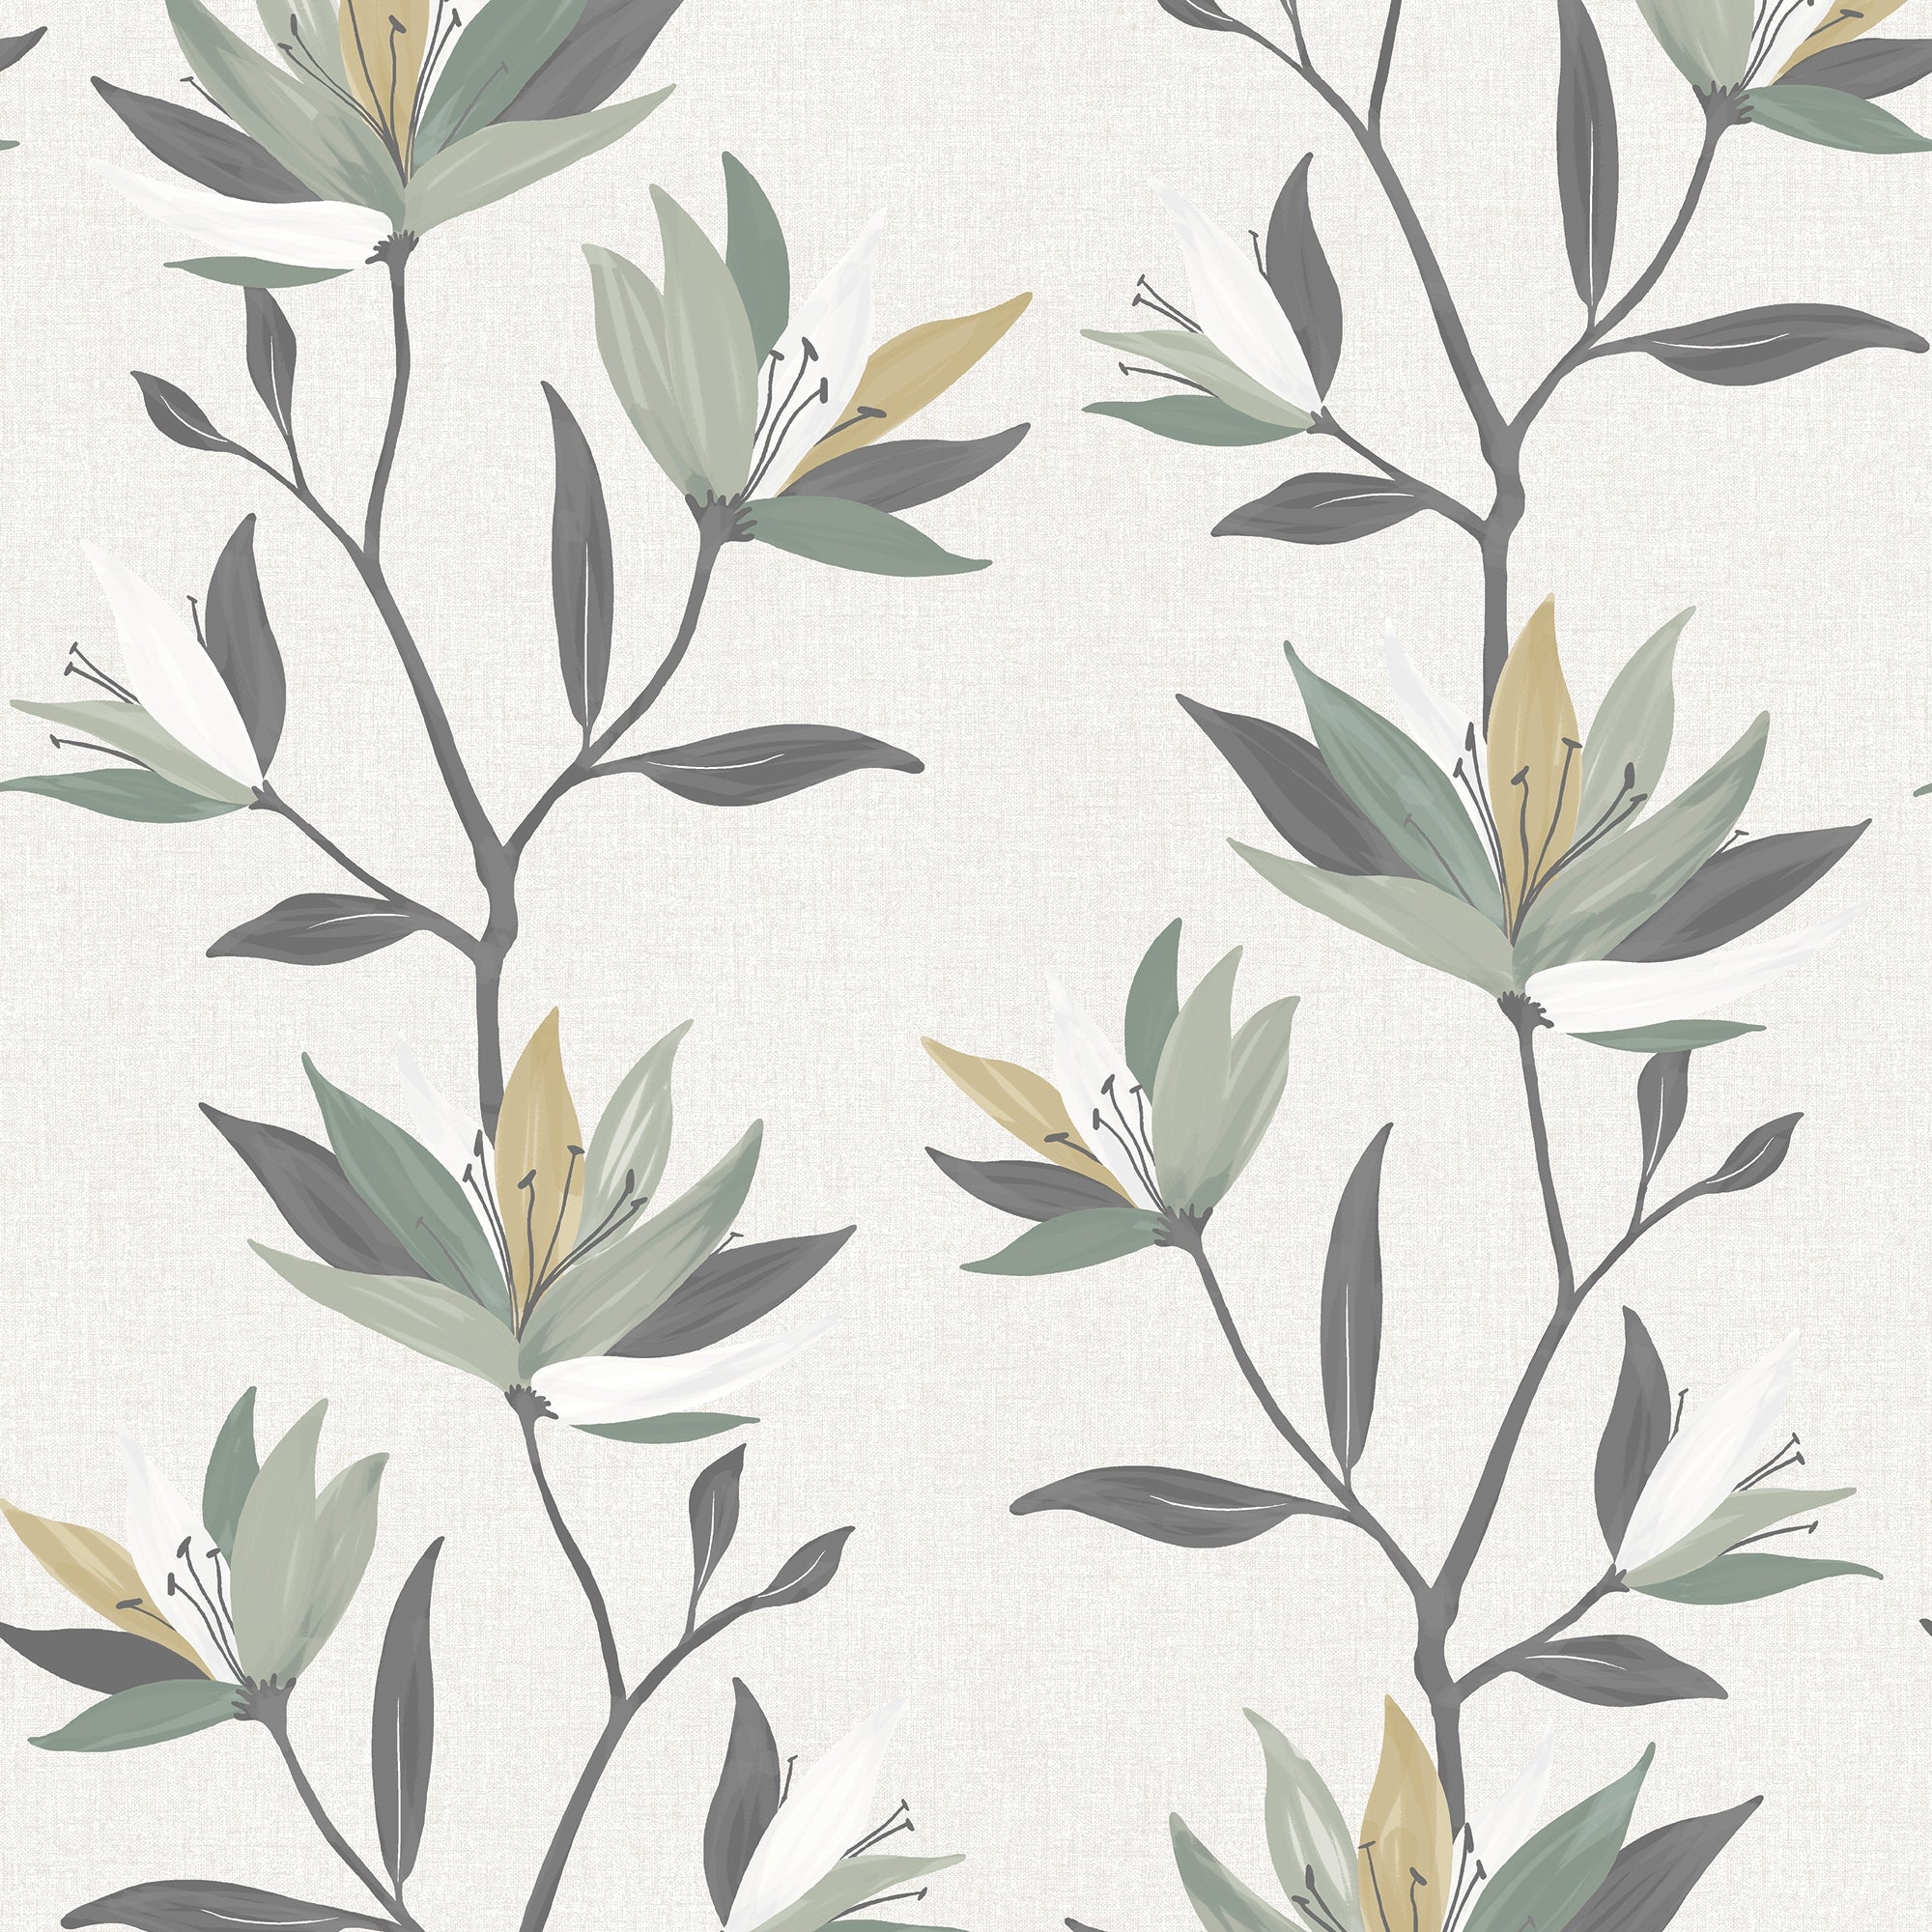 Lily Flame Retardant Daylight Made to Measure Roller Blind Lily Mellow Sage